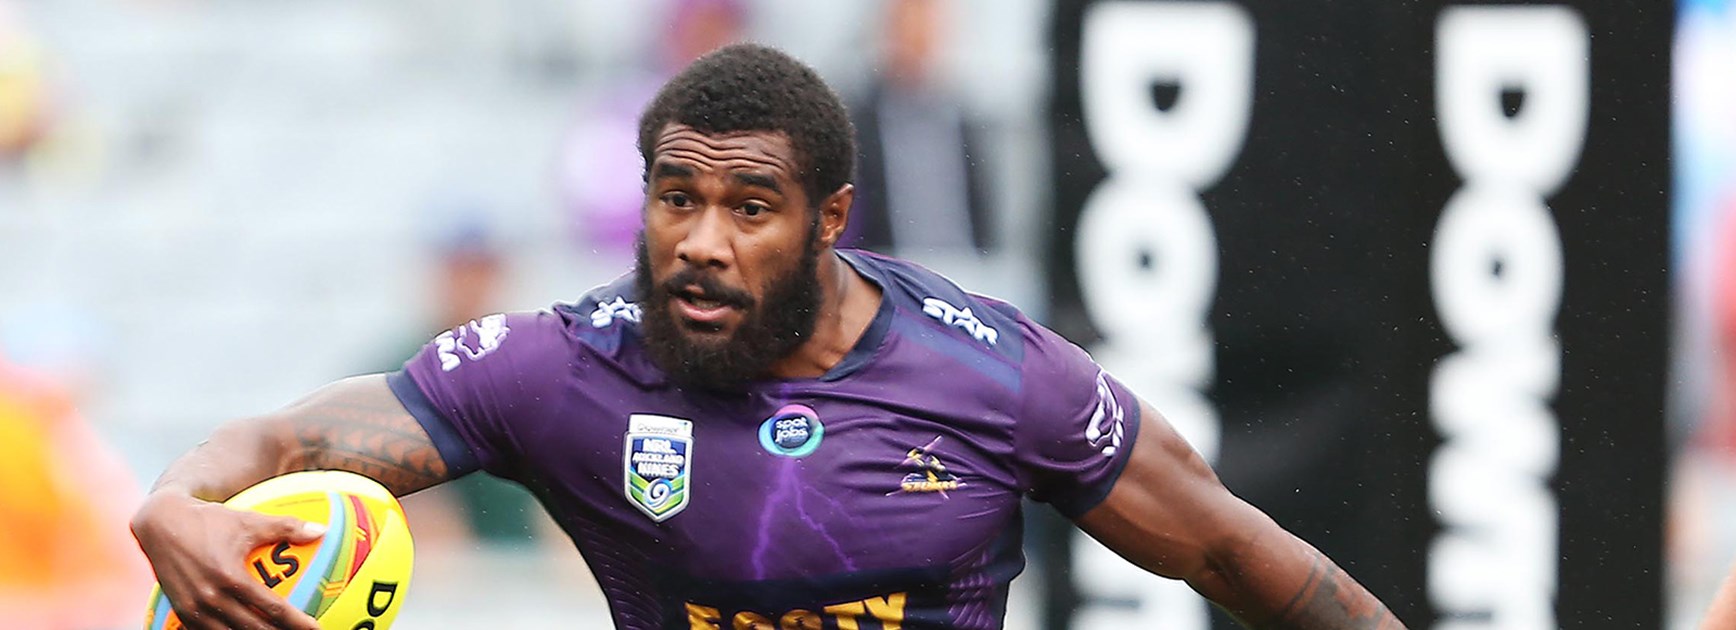 Marika Koroibete and the Storm moved into the Auckland Nines semi-finals with a win over the Cowboys.